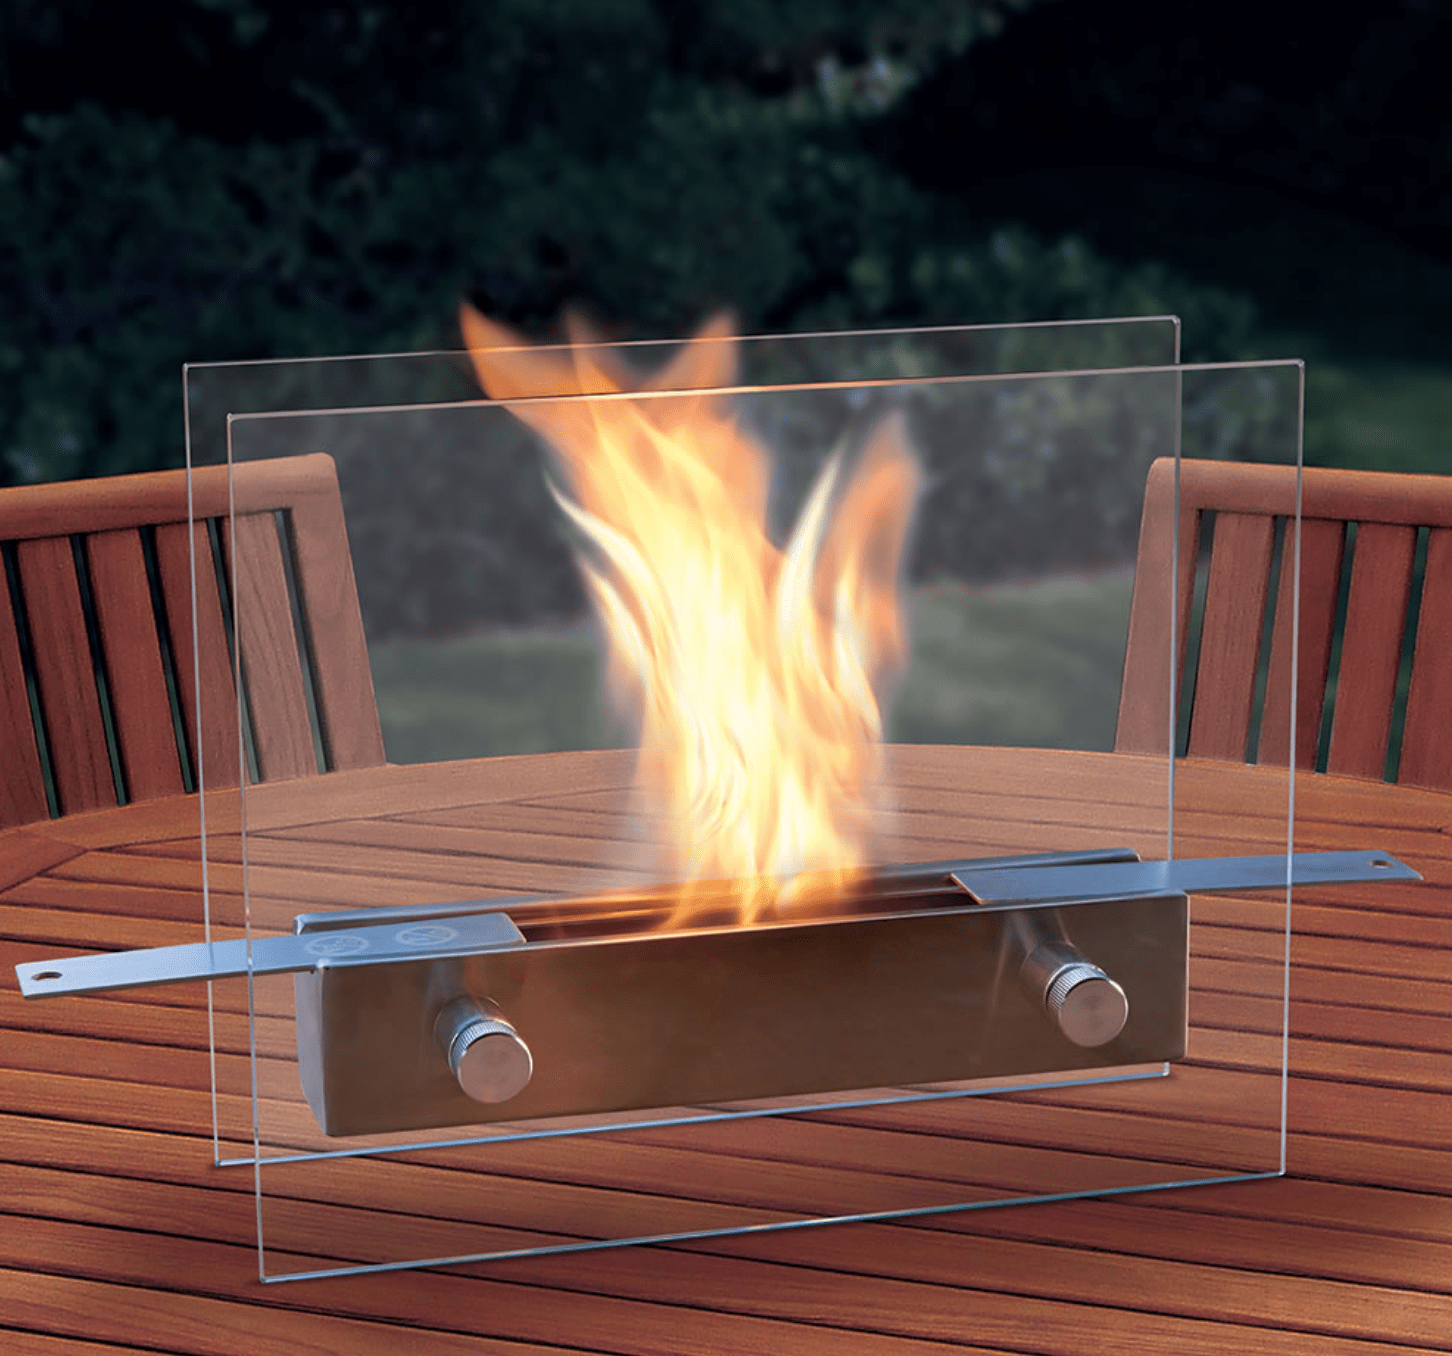 The Portable Tabletop Fireplace